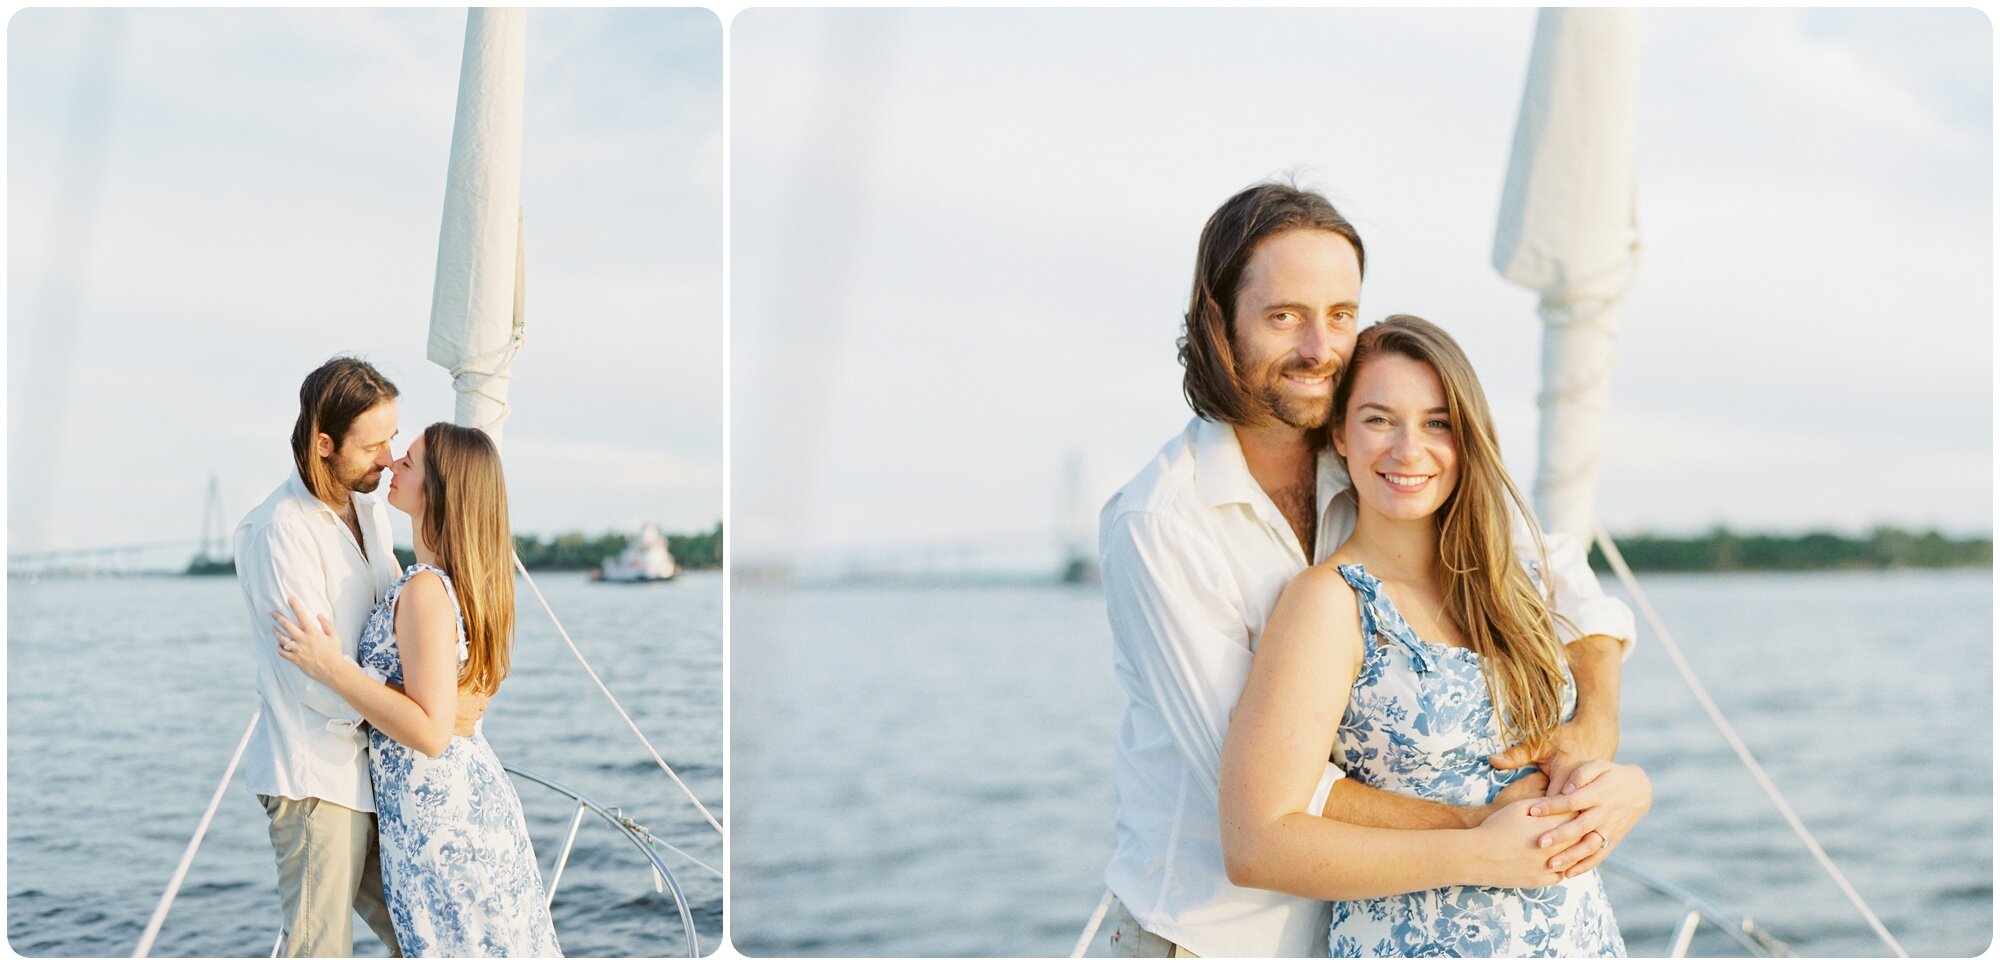 outdoor_sailboat_engagement_session_sunset_sail_kailee_dimeglio_photography_0009.jpg